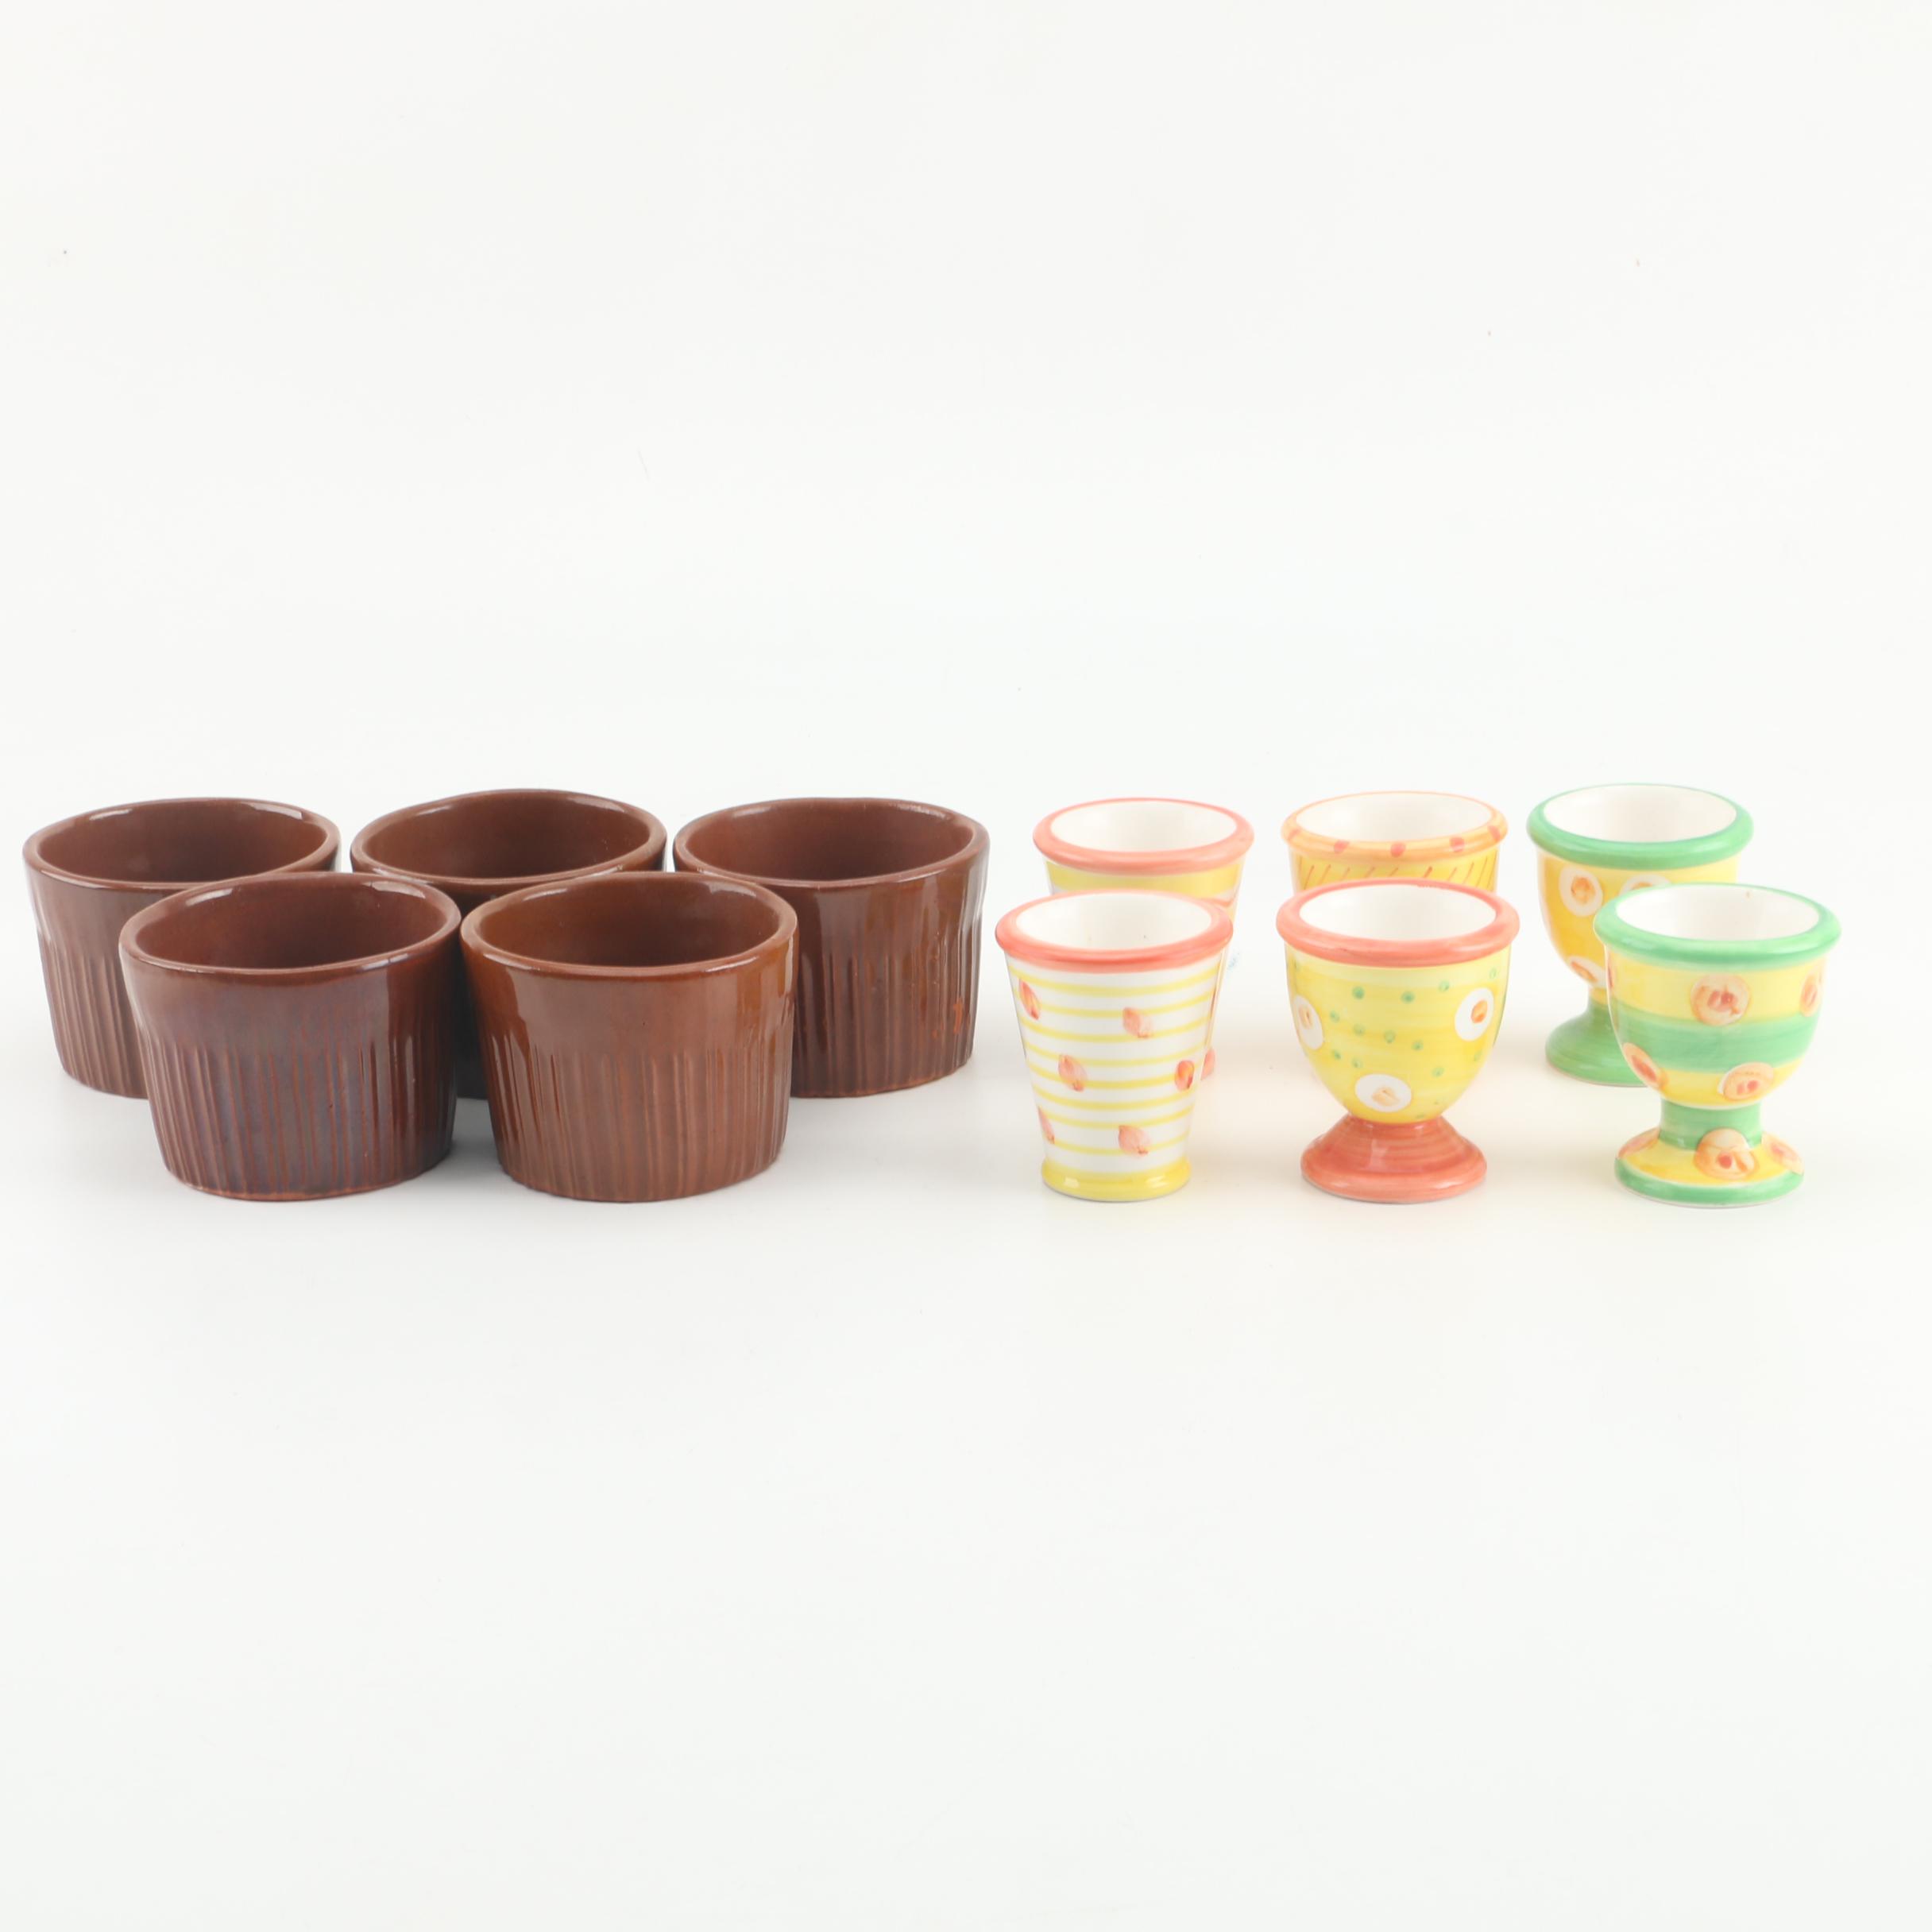 ceramic egg cups to paint